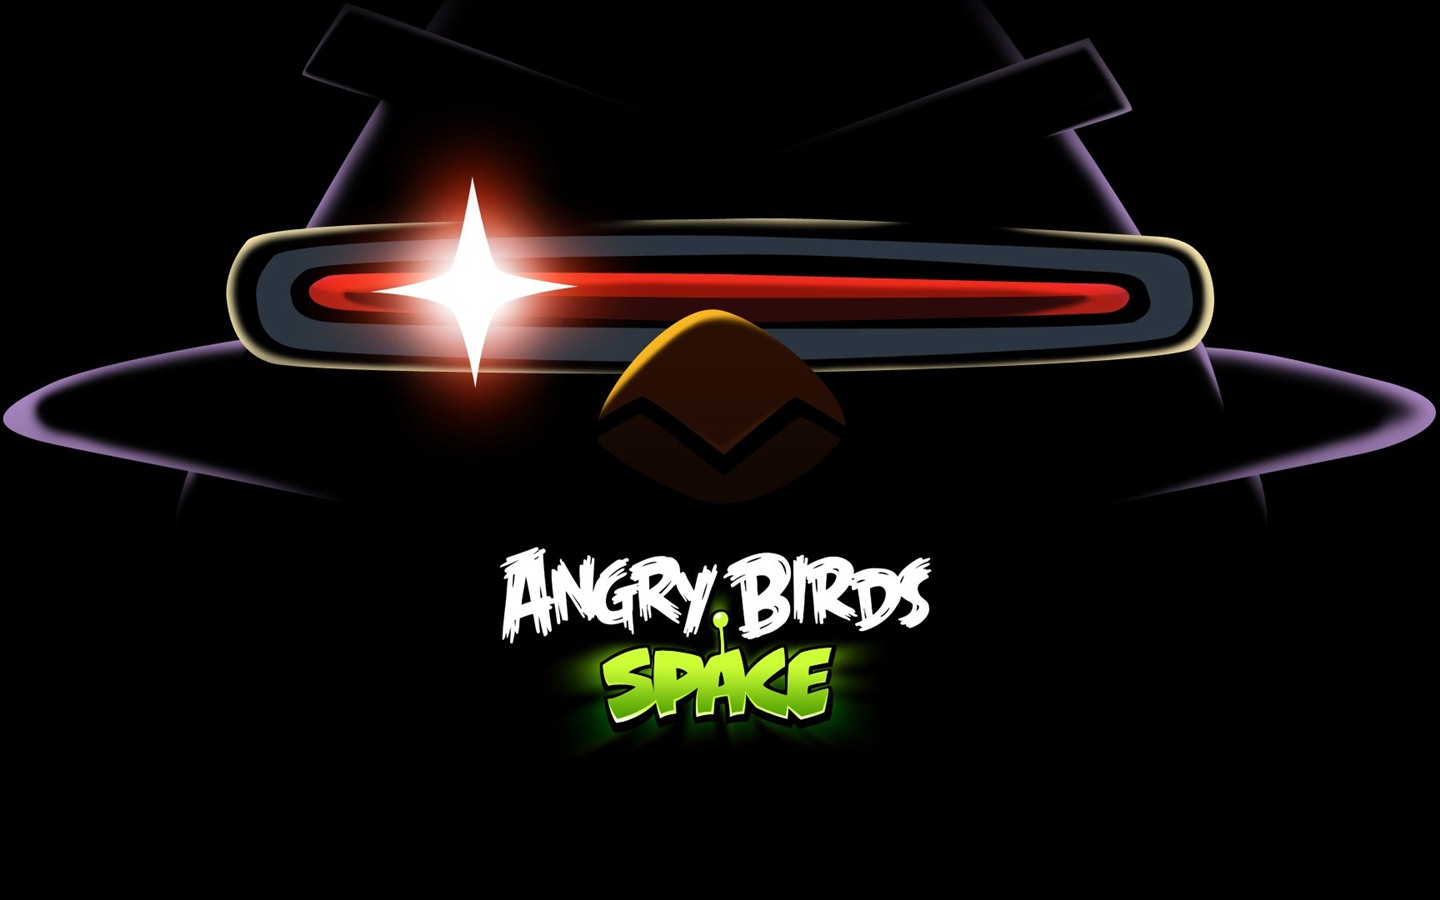 Angry Birds Game Wallpapers #22 - 1440x900